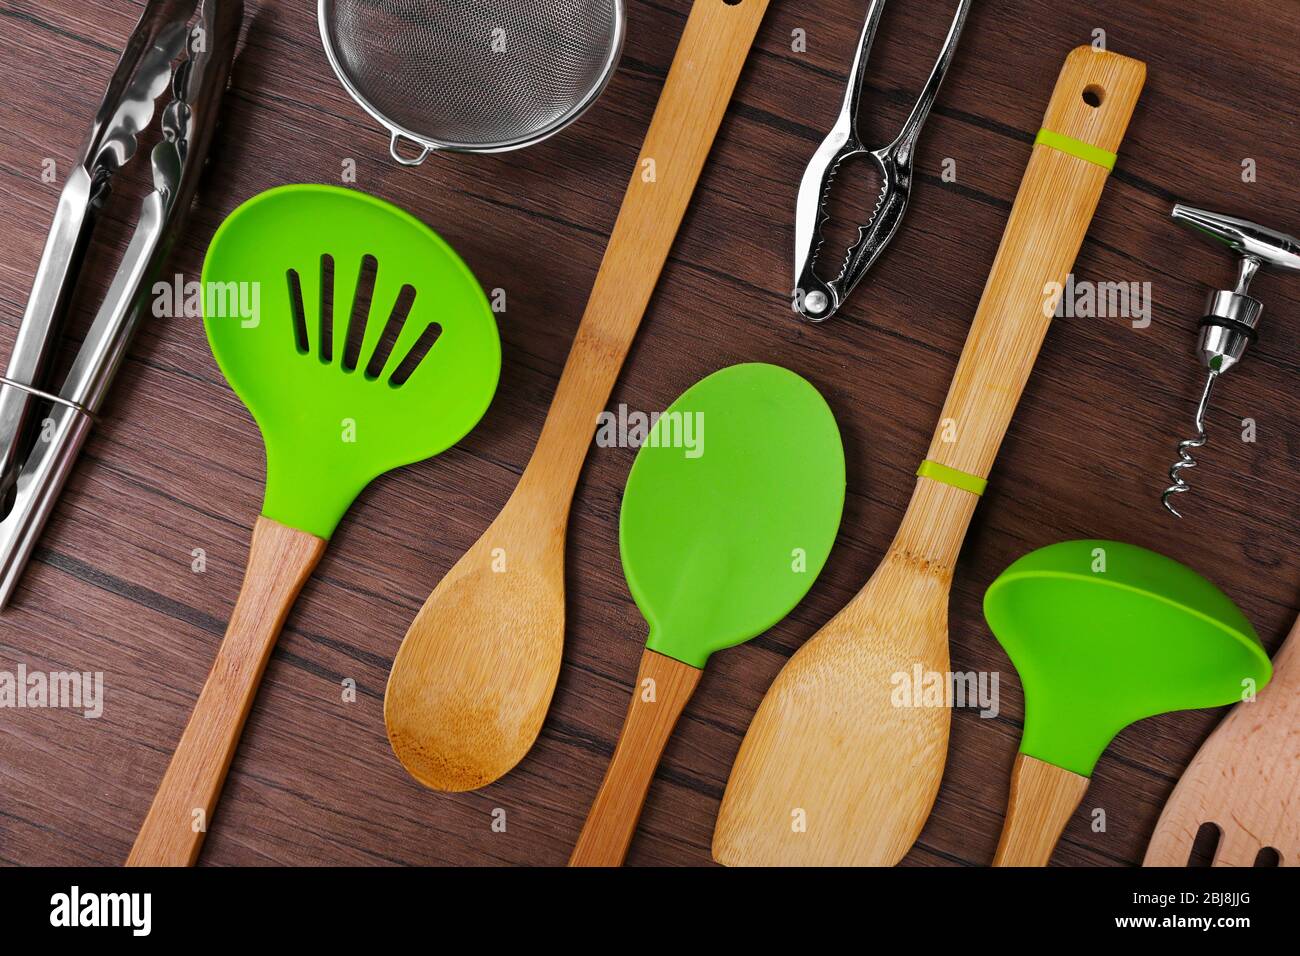 Set of stainless and wooden utensils on wooden background Stock Photo